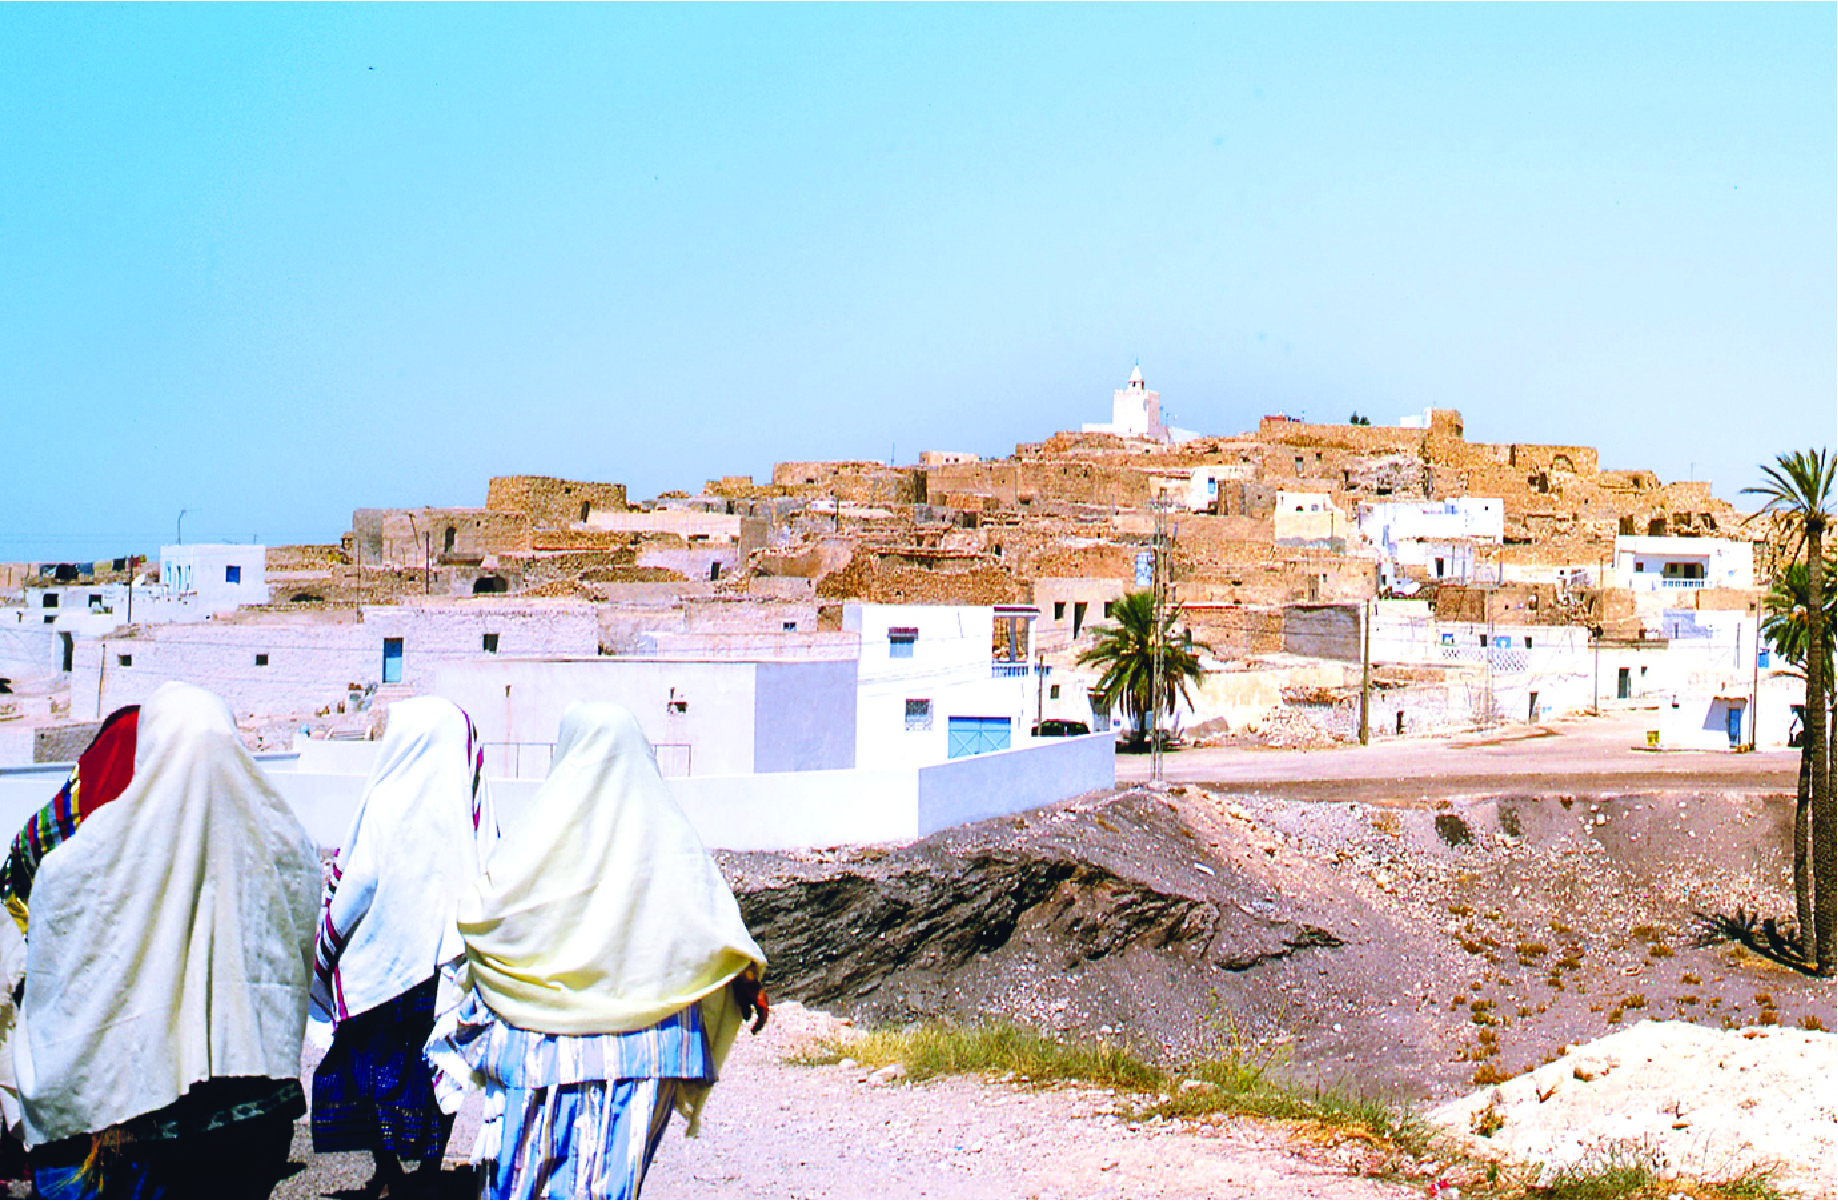 Tamezret is one of the most magnificent Berber villages in south Tunisia